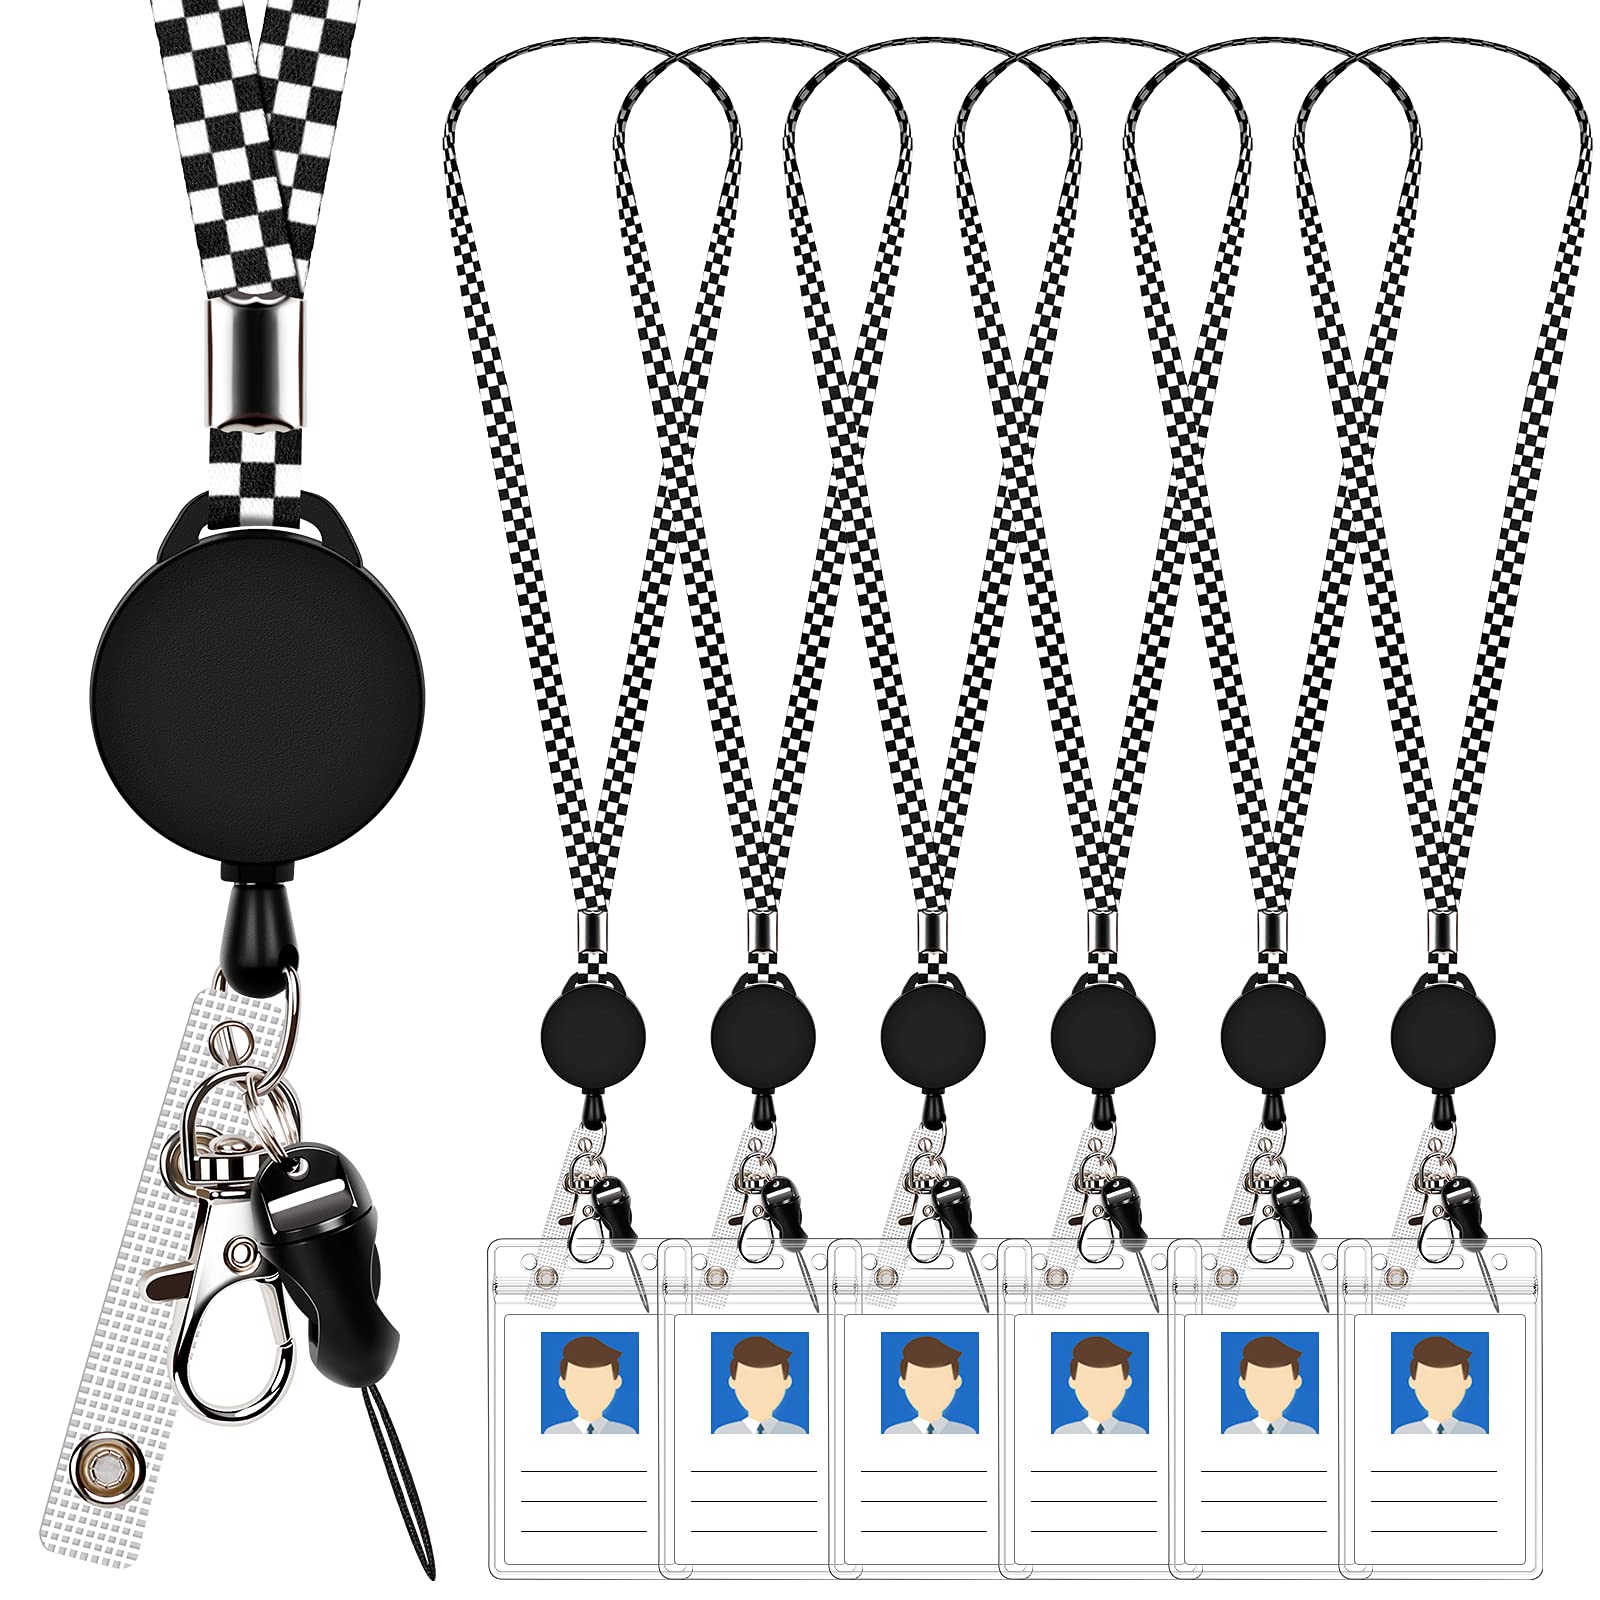 UpUgo 6 Pack Retractable Badge Lanyards And Id Badge Holder, Strap Lanyard With Swivel Metal Clasp For Badge Holders, Keychains, Offic